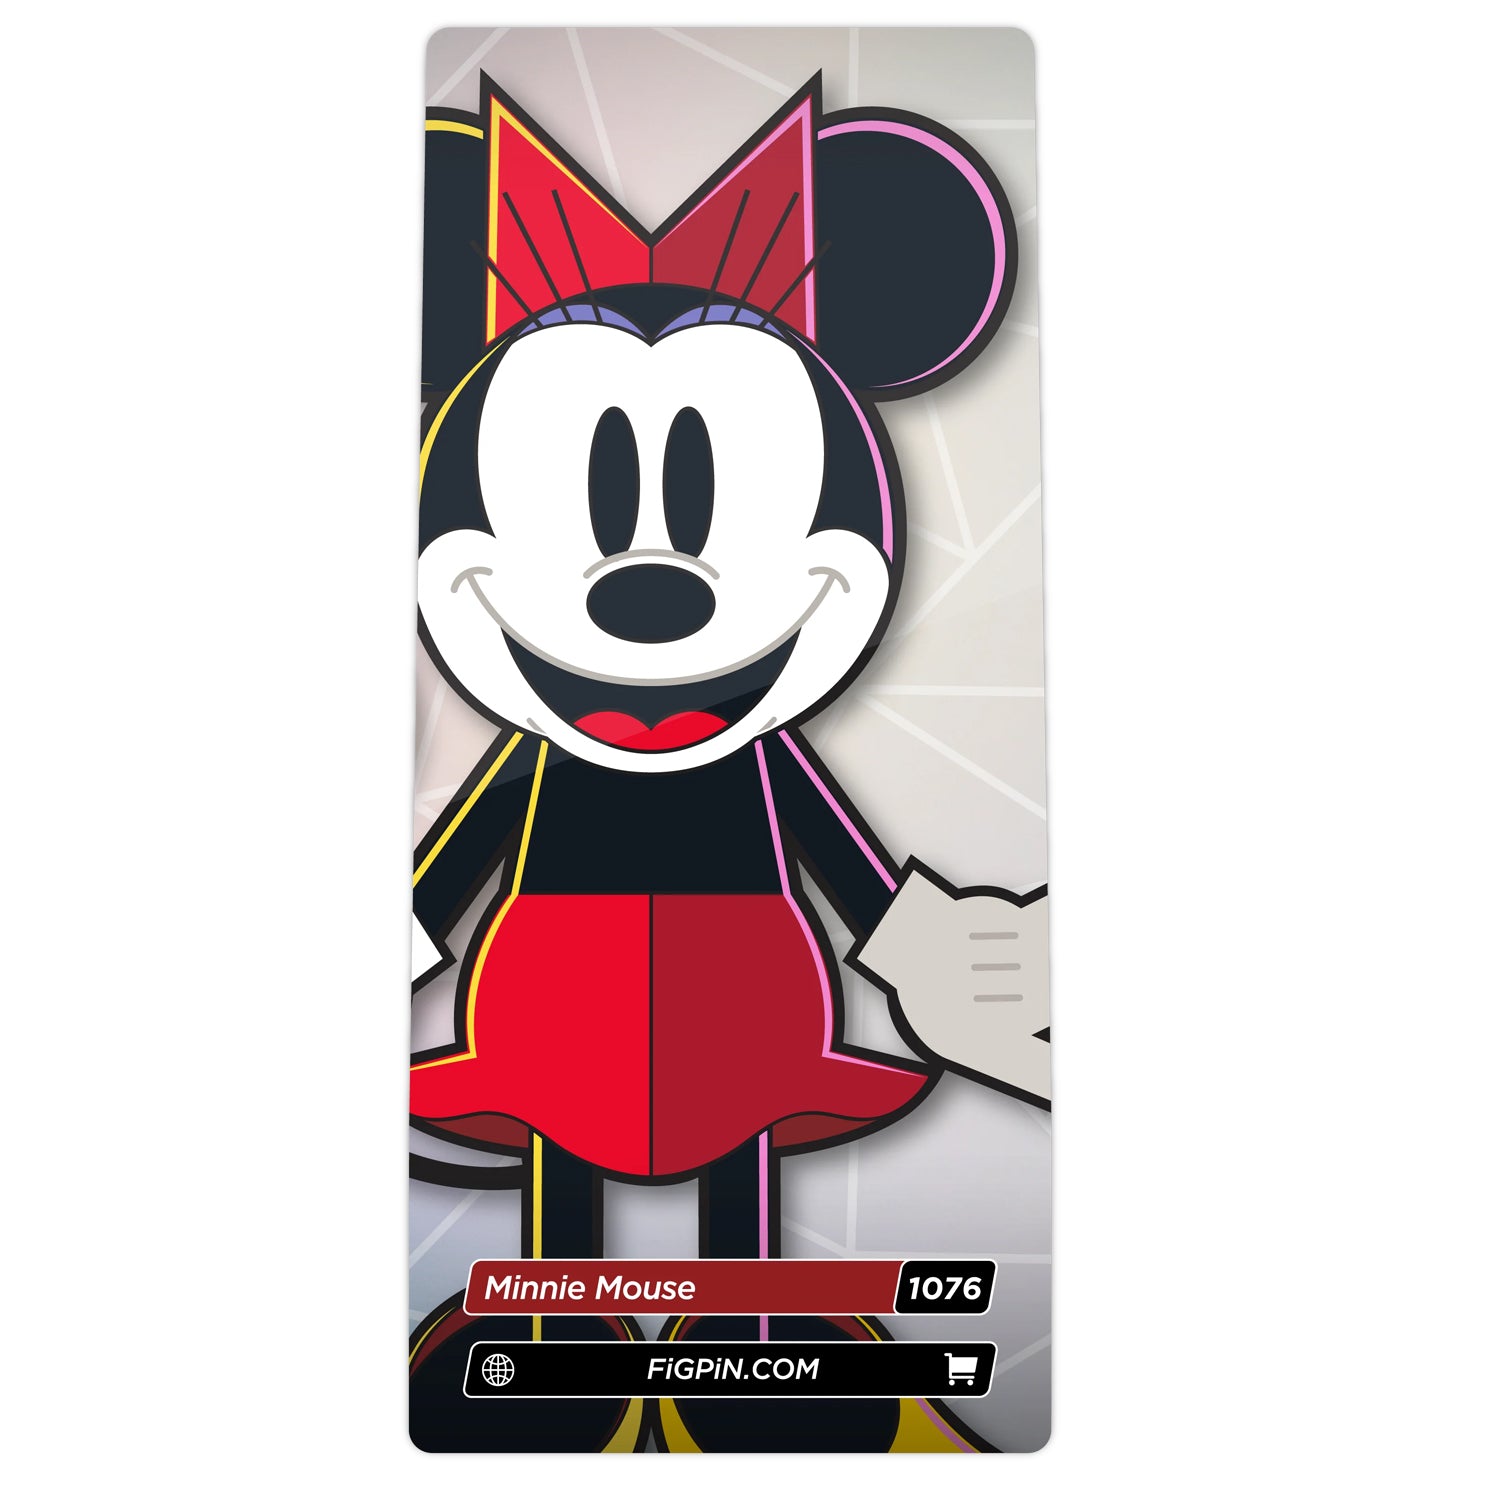 Disney 100 Minnie Mouse 3" Collectible Pin #1076